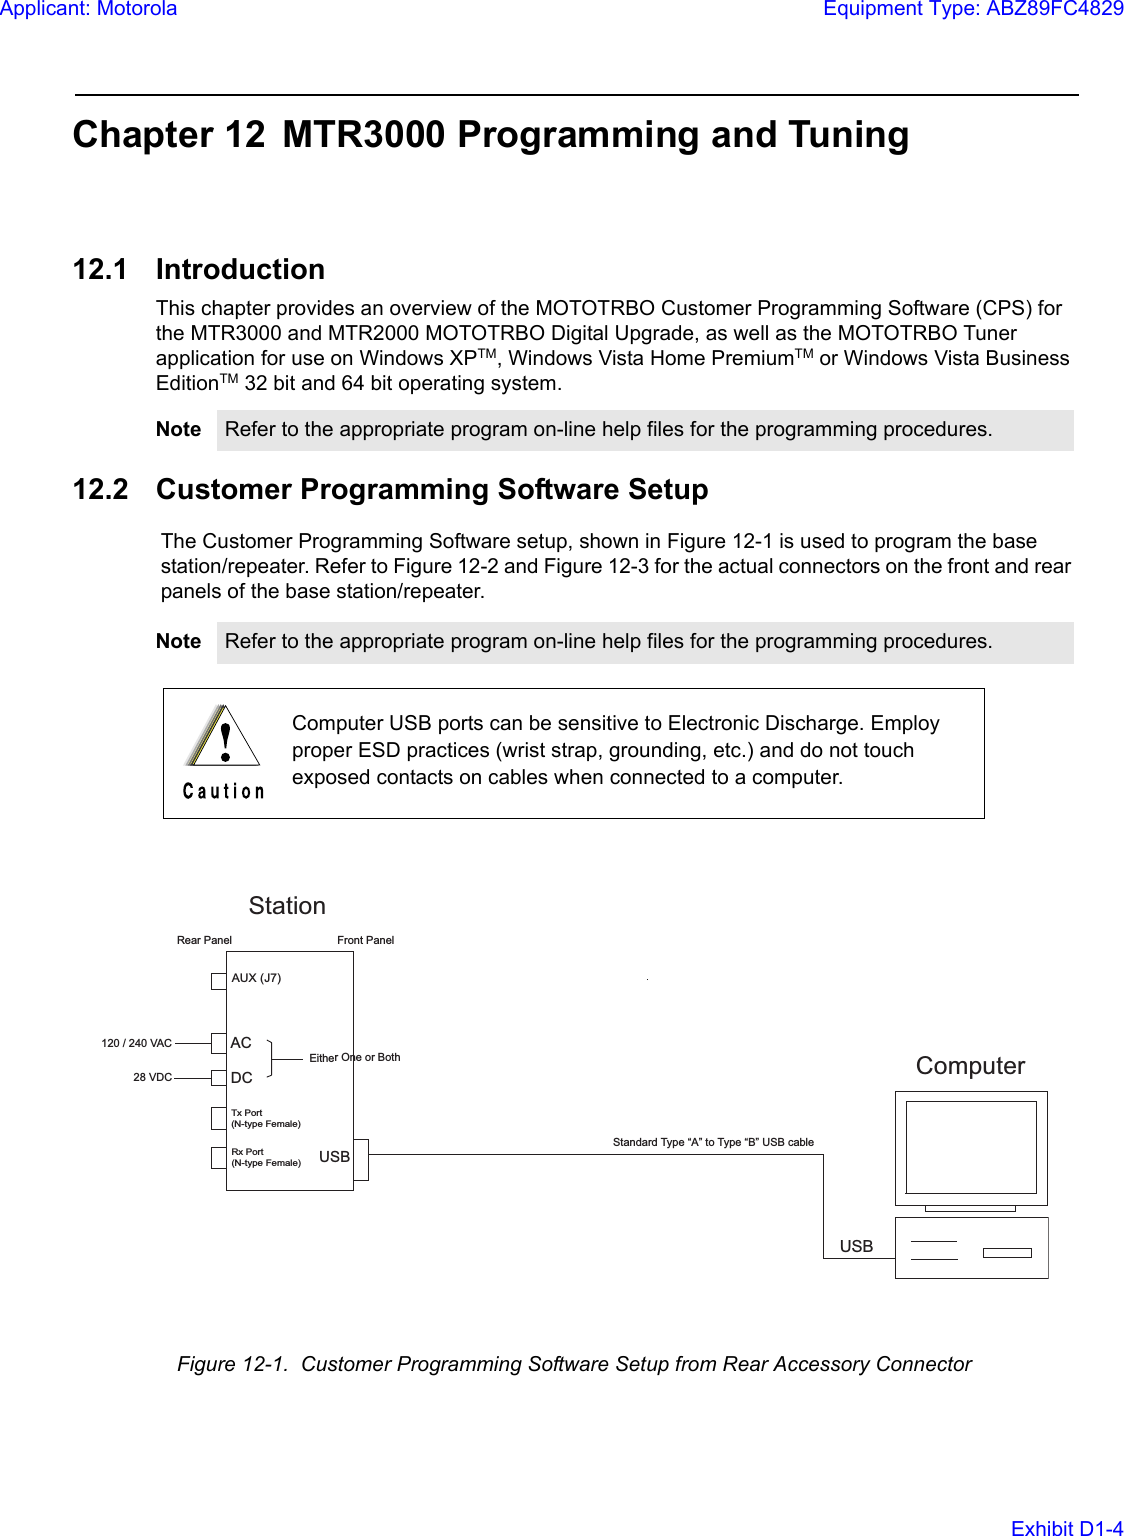 Chapter 12 MTR3000 Programming and Tuning12.1 IntroductionThis chapter provides an overview of the MOTOTRBO Customer Programming Software (CPS) for the MTR3000 and MTR2000 MOTOTRBO Digital Upgrade, as well as the MOTOTRBO Tuner application for use on Windows XPTM, Windows Vista Home PremiumTM or Windows Vista Business EditionTM 32 bit and 64 bit operating system. 12.2 Customer Programming Software SetupThe Customer Programming Software setup, shown in Figure 12-1 is used to program the base station/repeater. Refer to Figure 12-2 and Figure 12-3 for the actual connectors on the front and rear panels of the base station/repeater.Note Refer to the appropriate program on-line help files for the programming procedures.Note Refer to the appropriate program on-line help files for the programming procedures.Computer USB ports can be sensitive to Electronic Discharge. Employ proper ESD practices (wrist strap, grounding, etc.) and do not touch exposed contacts on cables when connected to a computer.Figure 12-1.  Customer Programming Software Setup from Rear Accessory ConnectorFront PanelUSBACUSB120 / 240 VACStationTx Port(N-type Female)Rx Port(N-type Female)AUX (J7)DC28 VDCEither One or BothStandard Type “A” to Type “B” USB cable Rear PanelComputerApplicant: MotorolaEquipment Type: ABZ89FC4829Exhibit D1-4